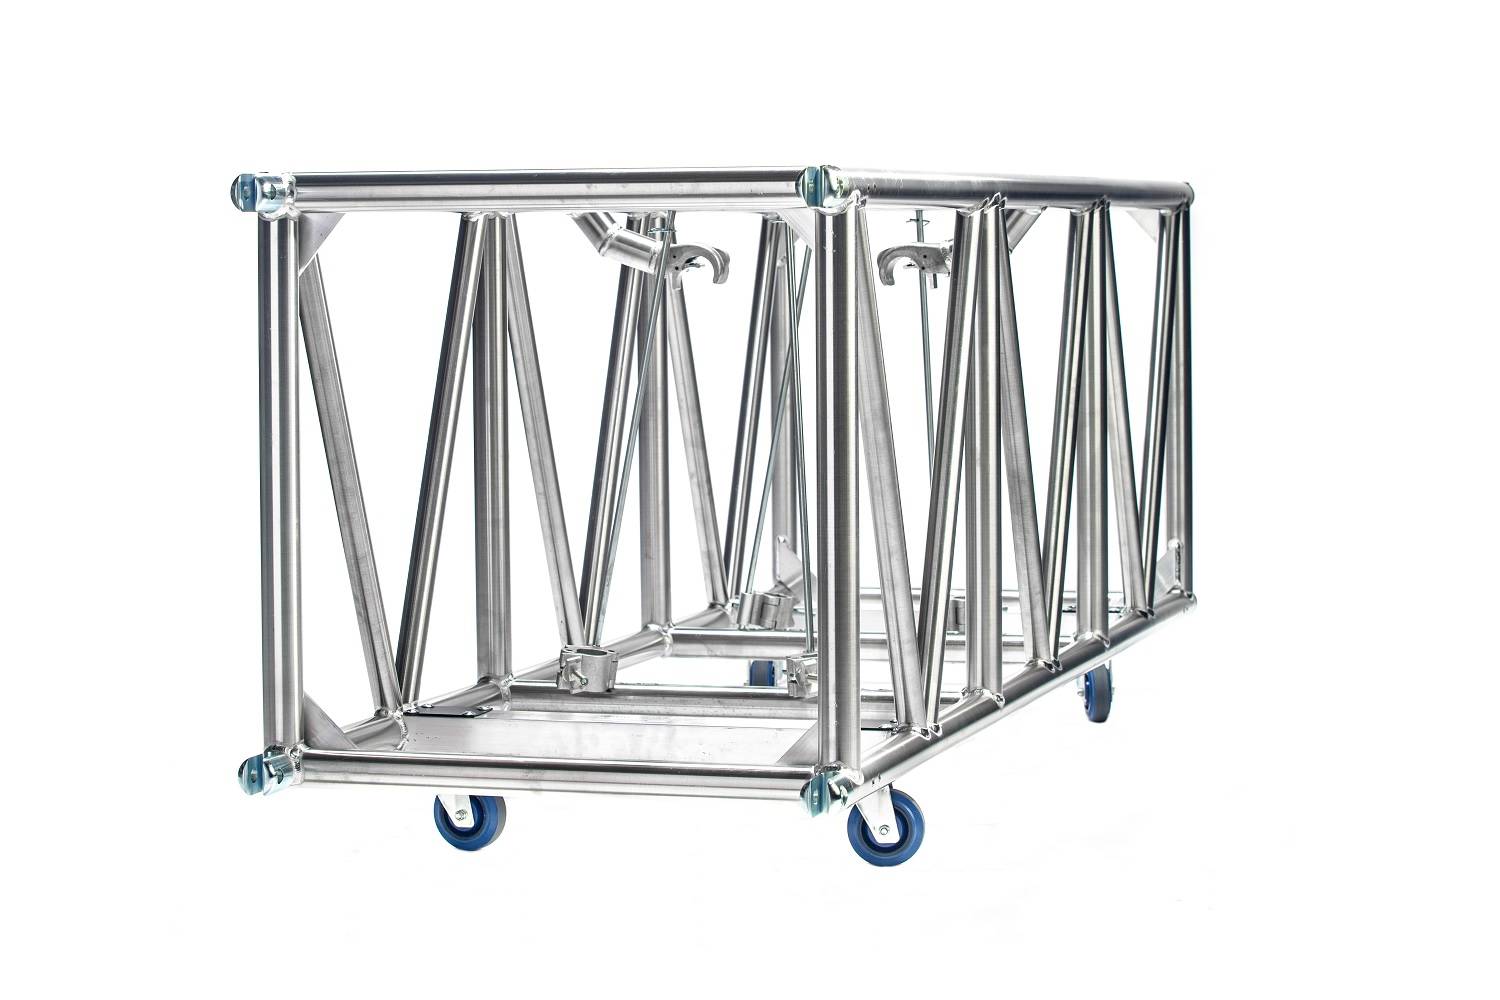 Heavy duty pre-rig truss 30 x 30 spigoted